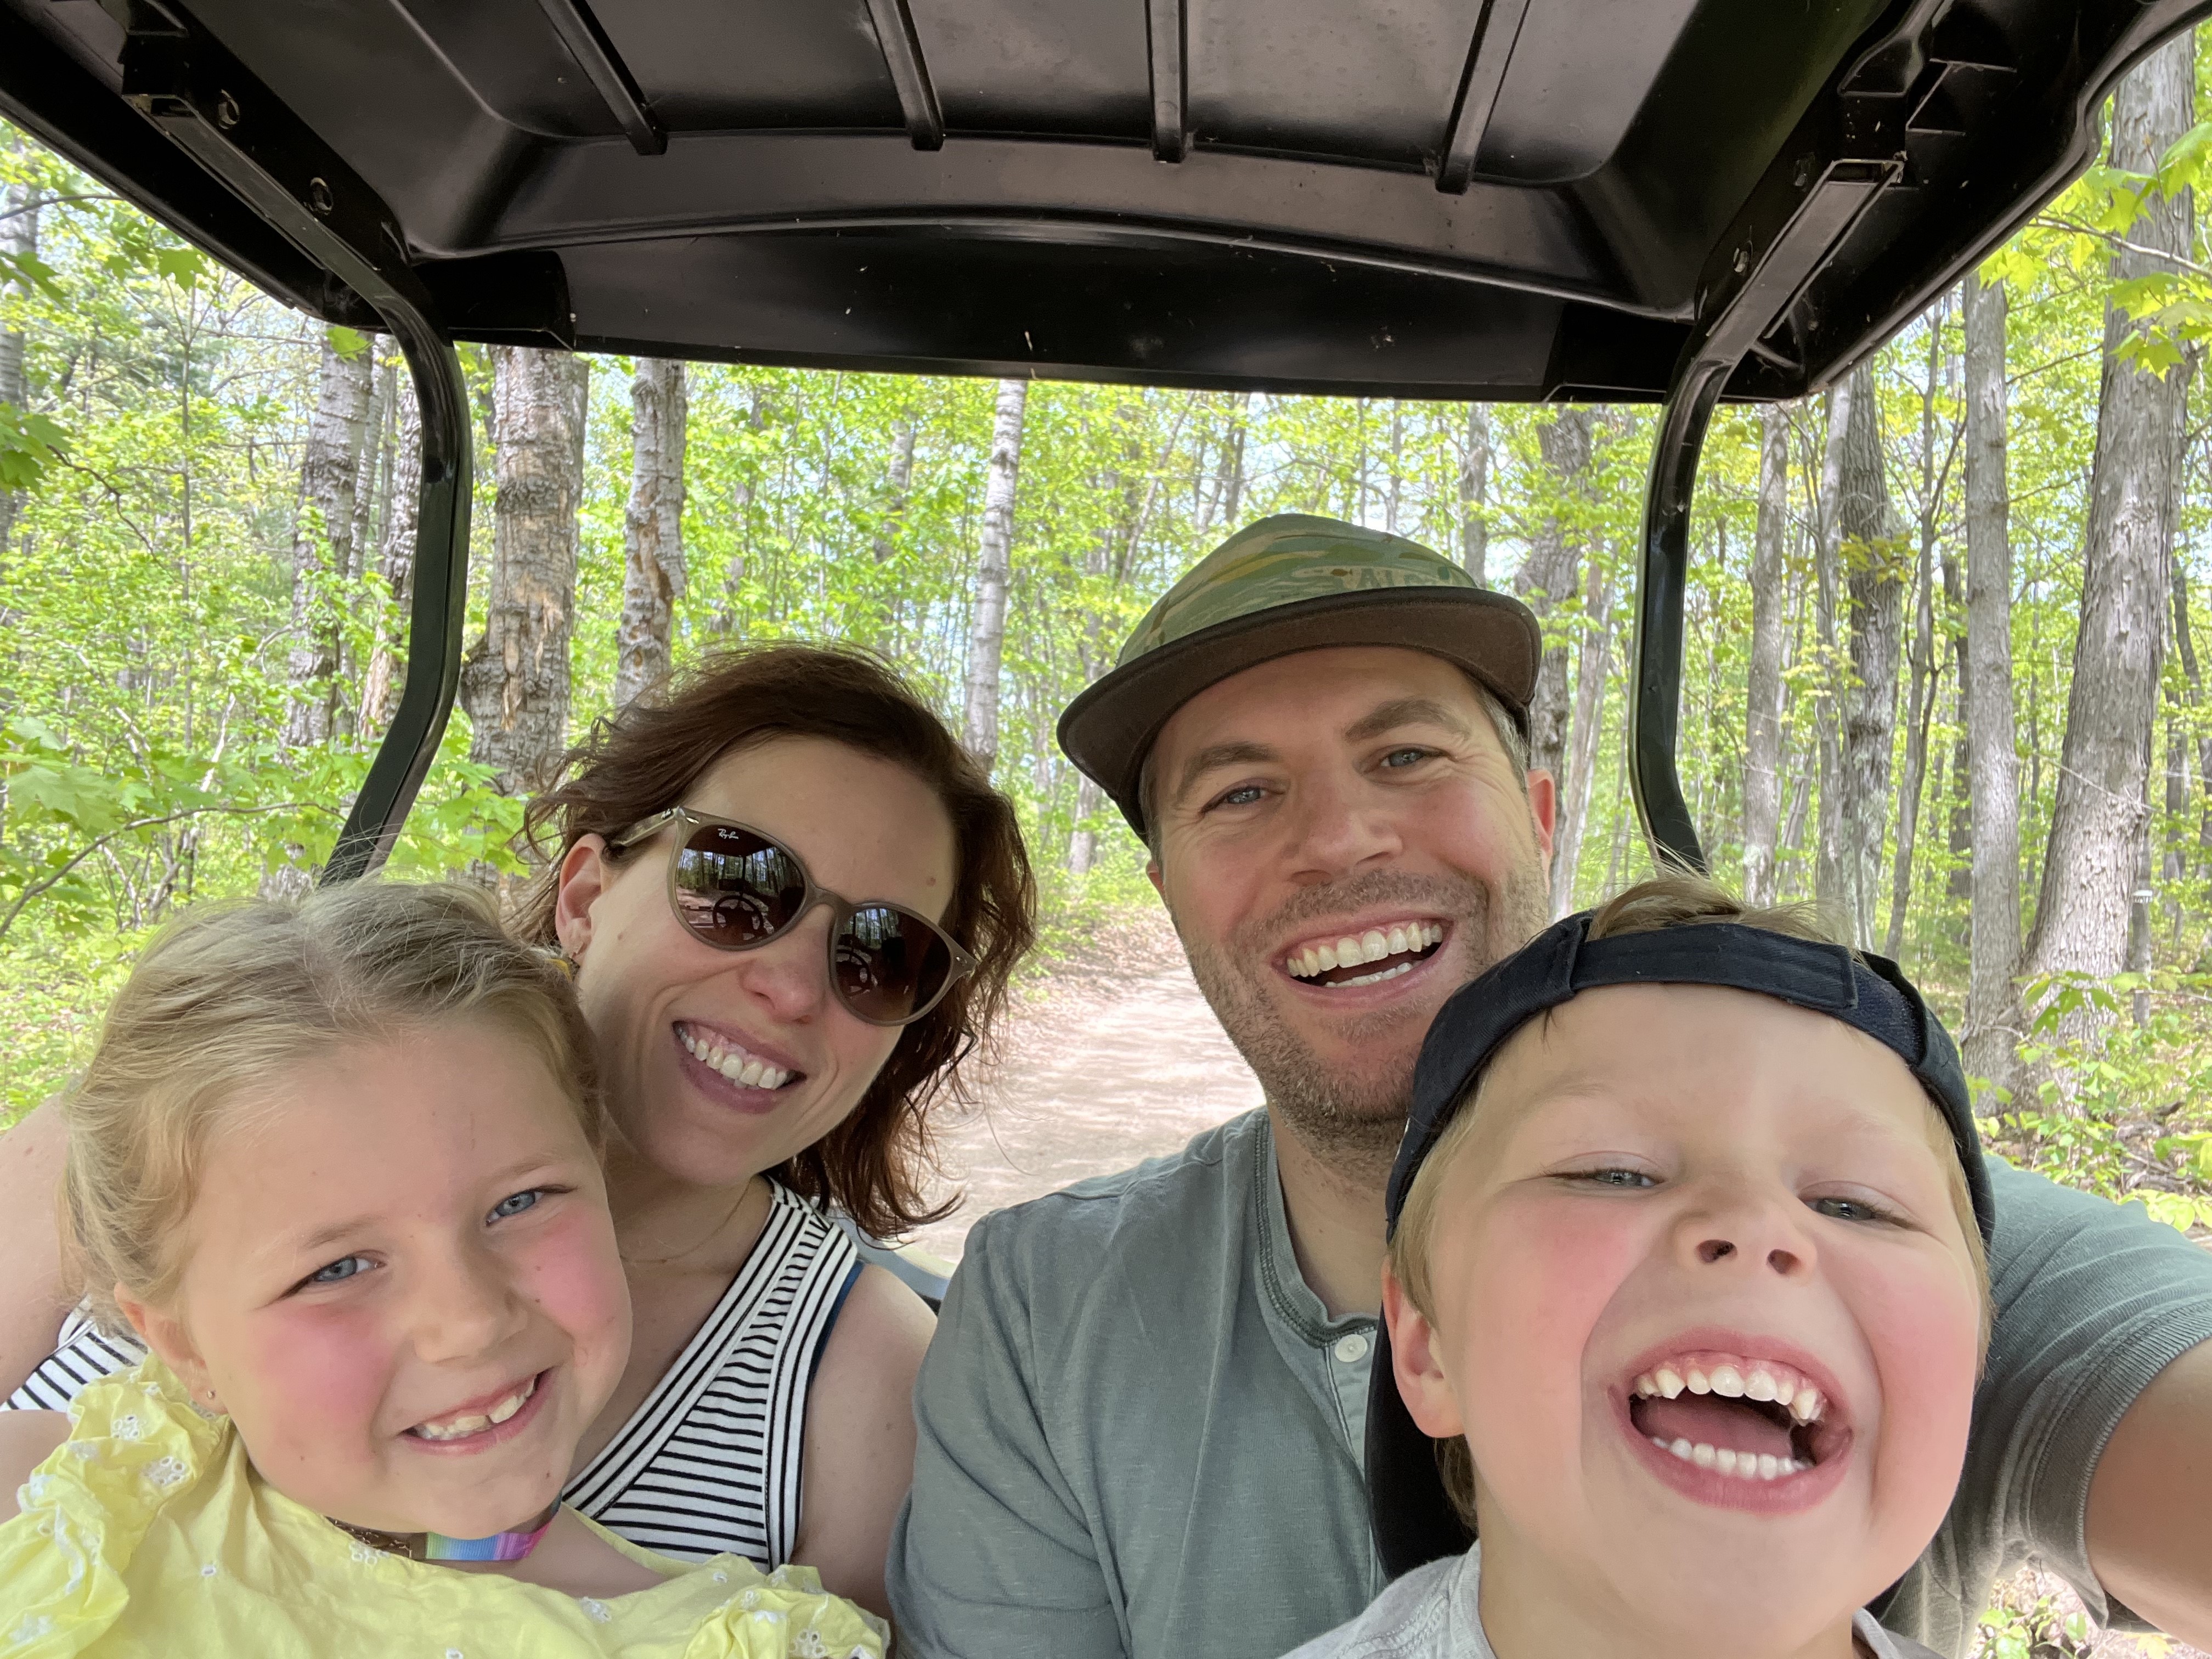 Attorney Melissa Demorest LeDuc with her husband, Jeff, and their two children, Mae and Harley, pose for their annual Memorial Day golf cart selfie, a tradition the family has followed since the children were babies.